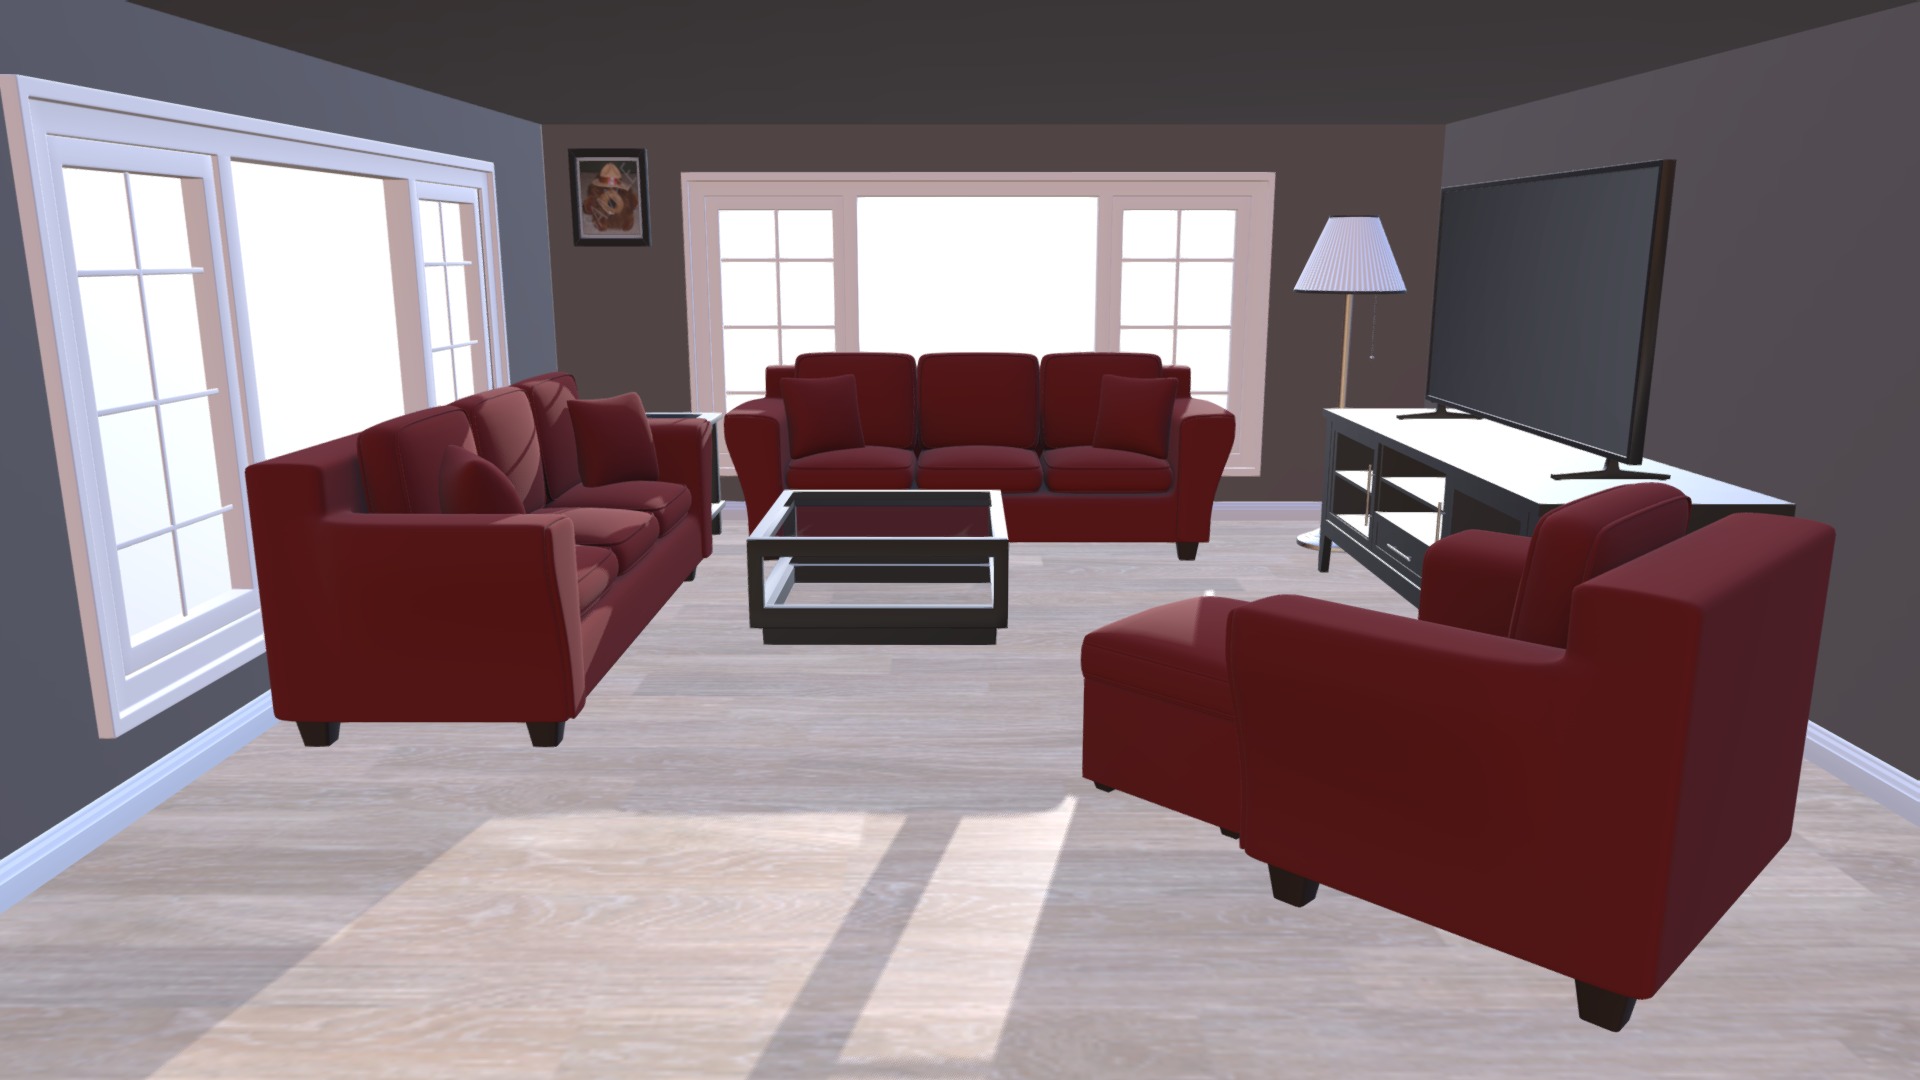 3D model Modern Living Room Scene - This is a 3D model of the Modern Living Room Scene. The 3D model is about a living room with red couches.